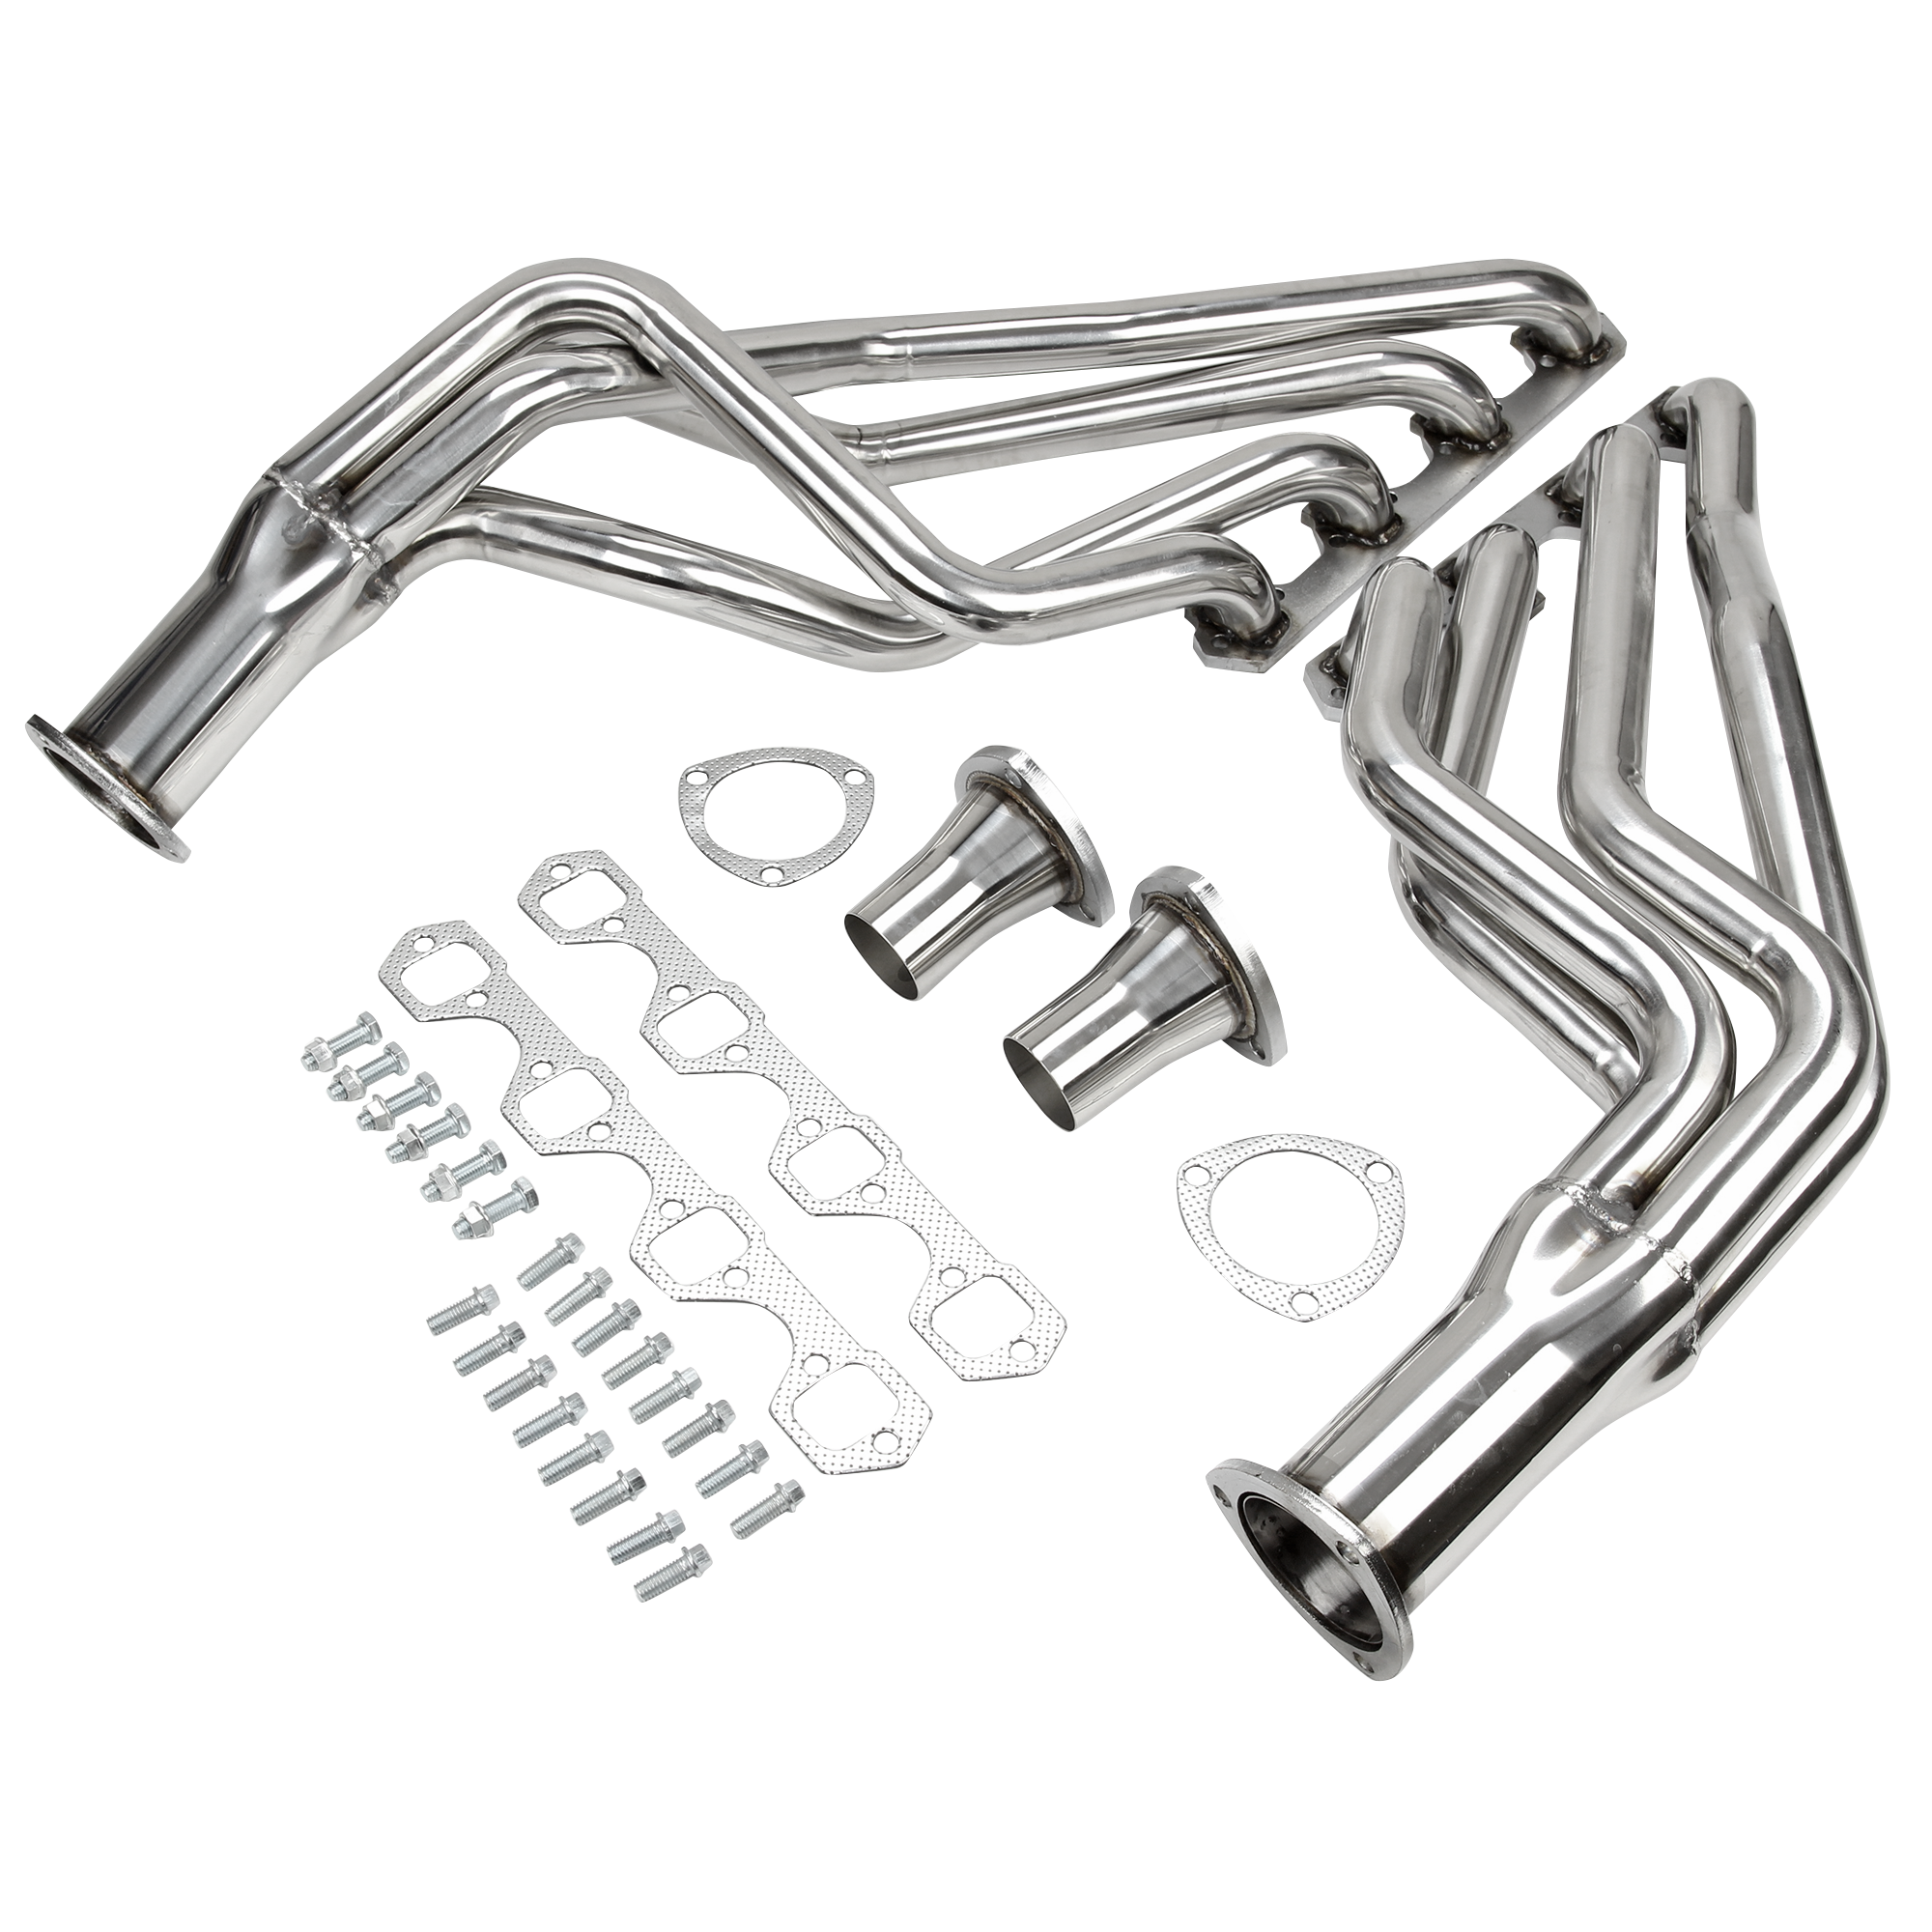 For 64-70 Ford SBF Mustang 289 302 351 Long Tube Stainles Exhaust Headers New